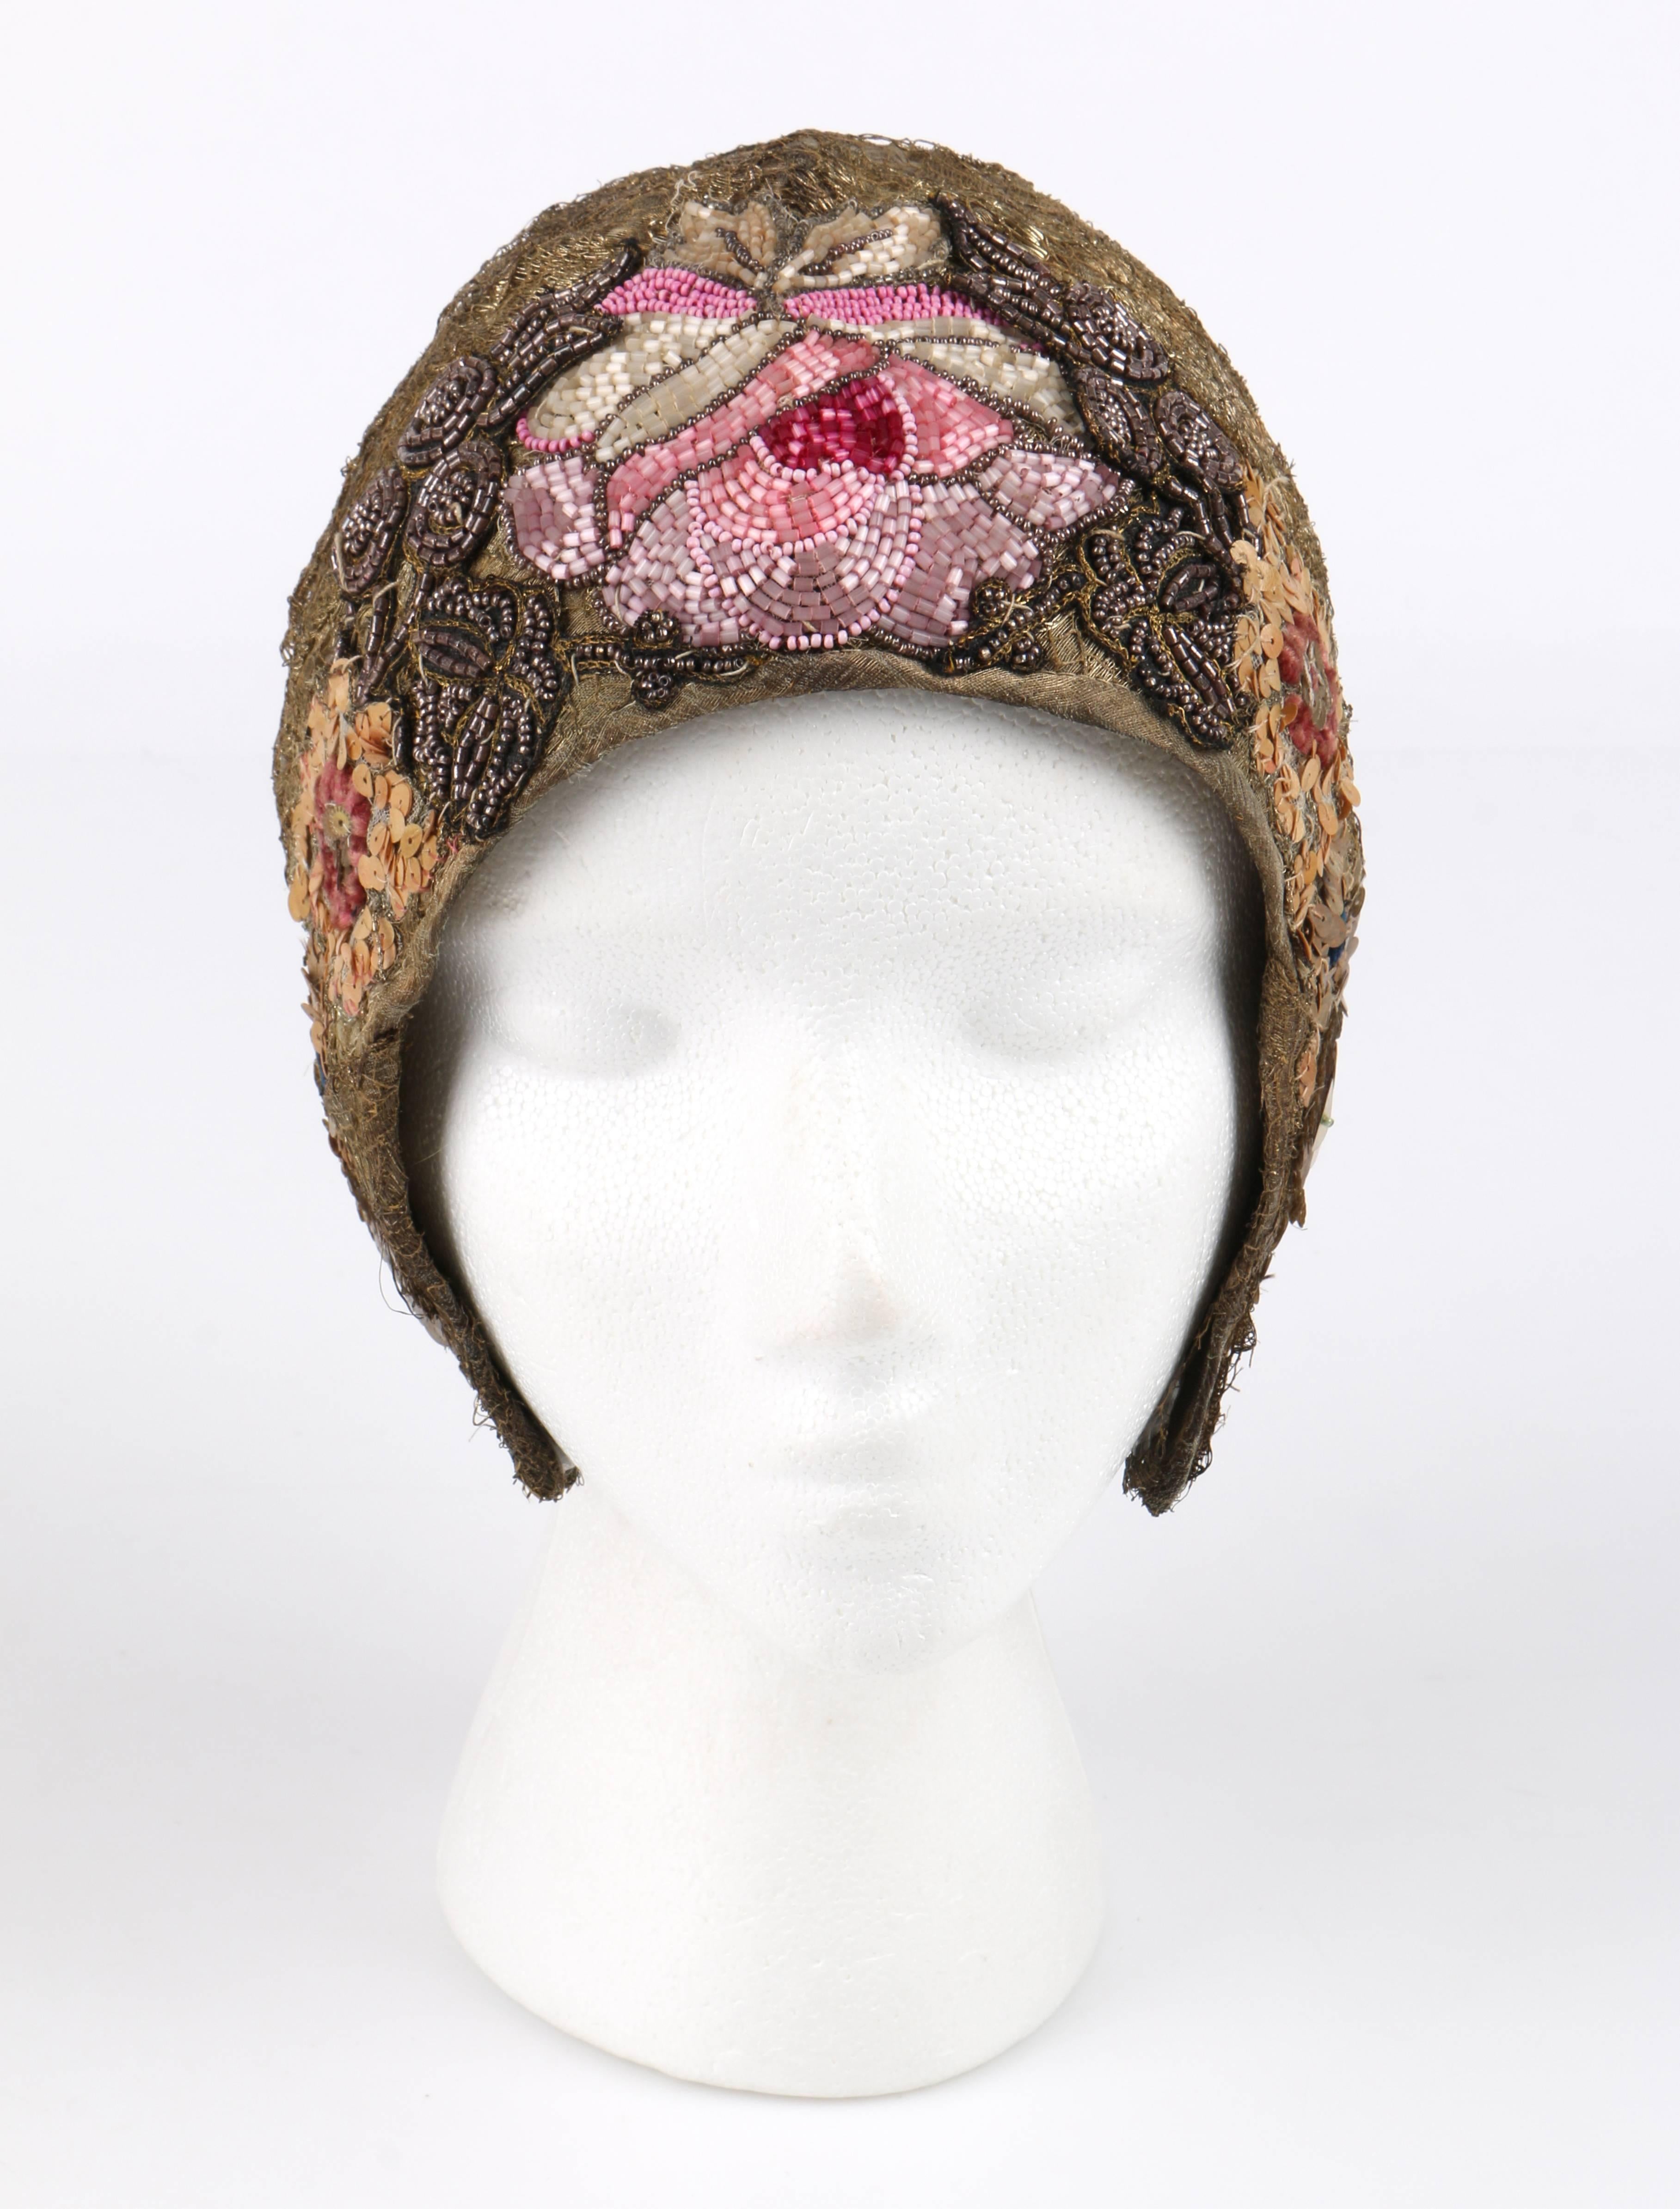 Vintage c.1920's Mannheimer gold lace floral embellished helmut style flapper cloche evening hat. Metallic bullion gold chantilly lace body. Multicolored hand glass beaded and sequin floral embellishment around temple and front. Three darts at back.